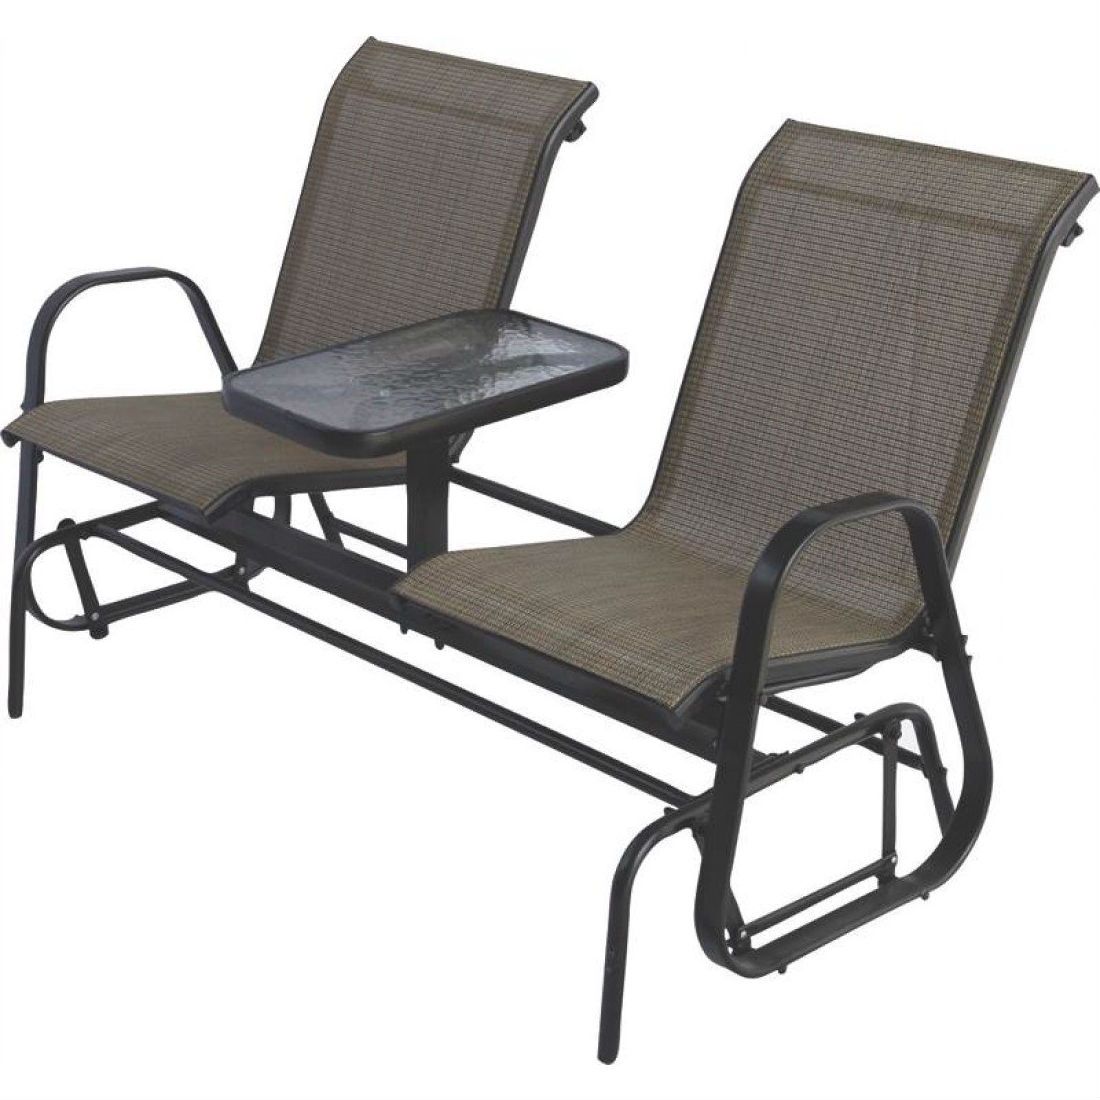 2 Person Outdoor Patio Furniture Glider Chairs With Console Table For Outdoor Patio Swing Glider Bench Chair S (View 8 of 25)